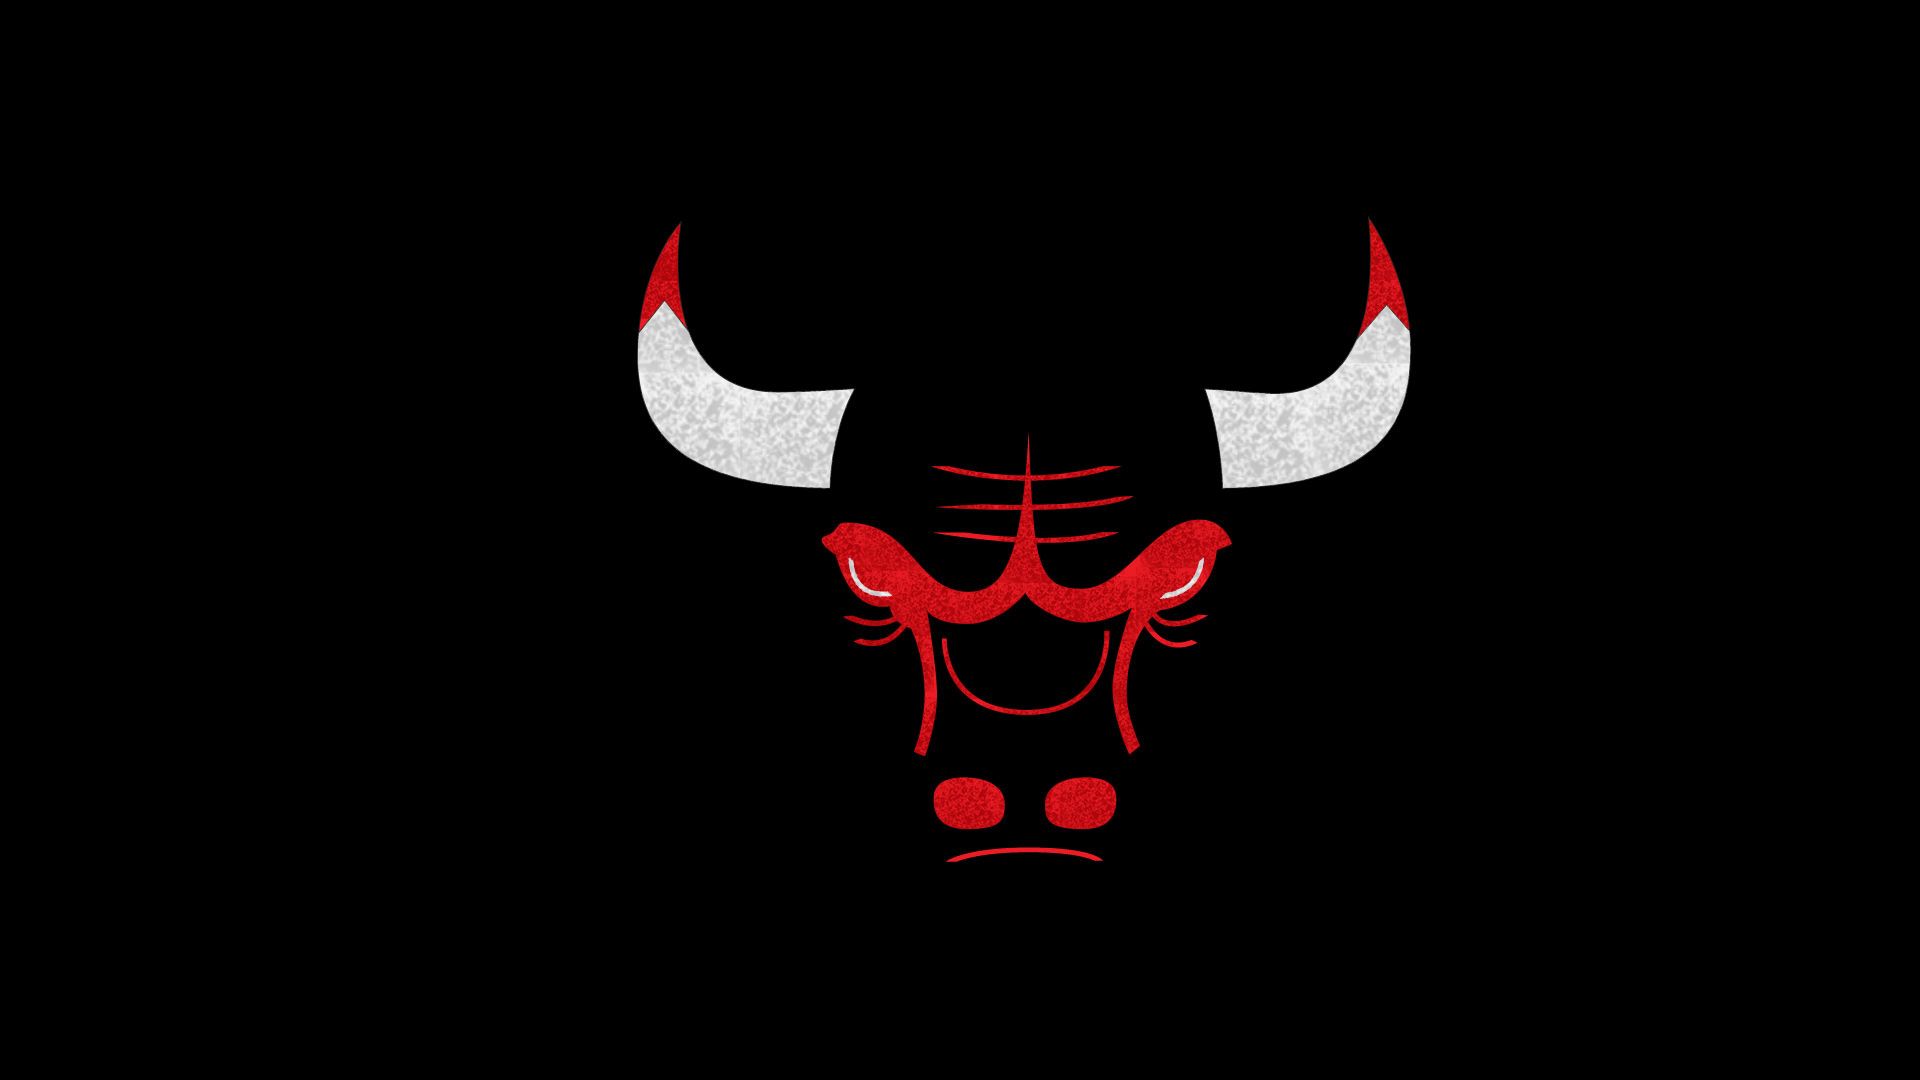 Chicago Bulls Wallpaper HD 2016 | Wallpapers, Backgrounds, Images ...